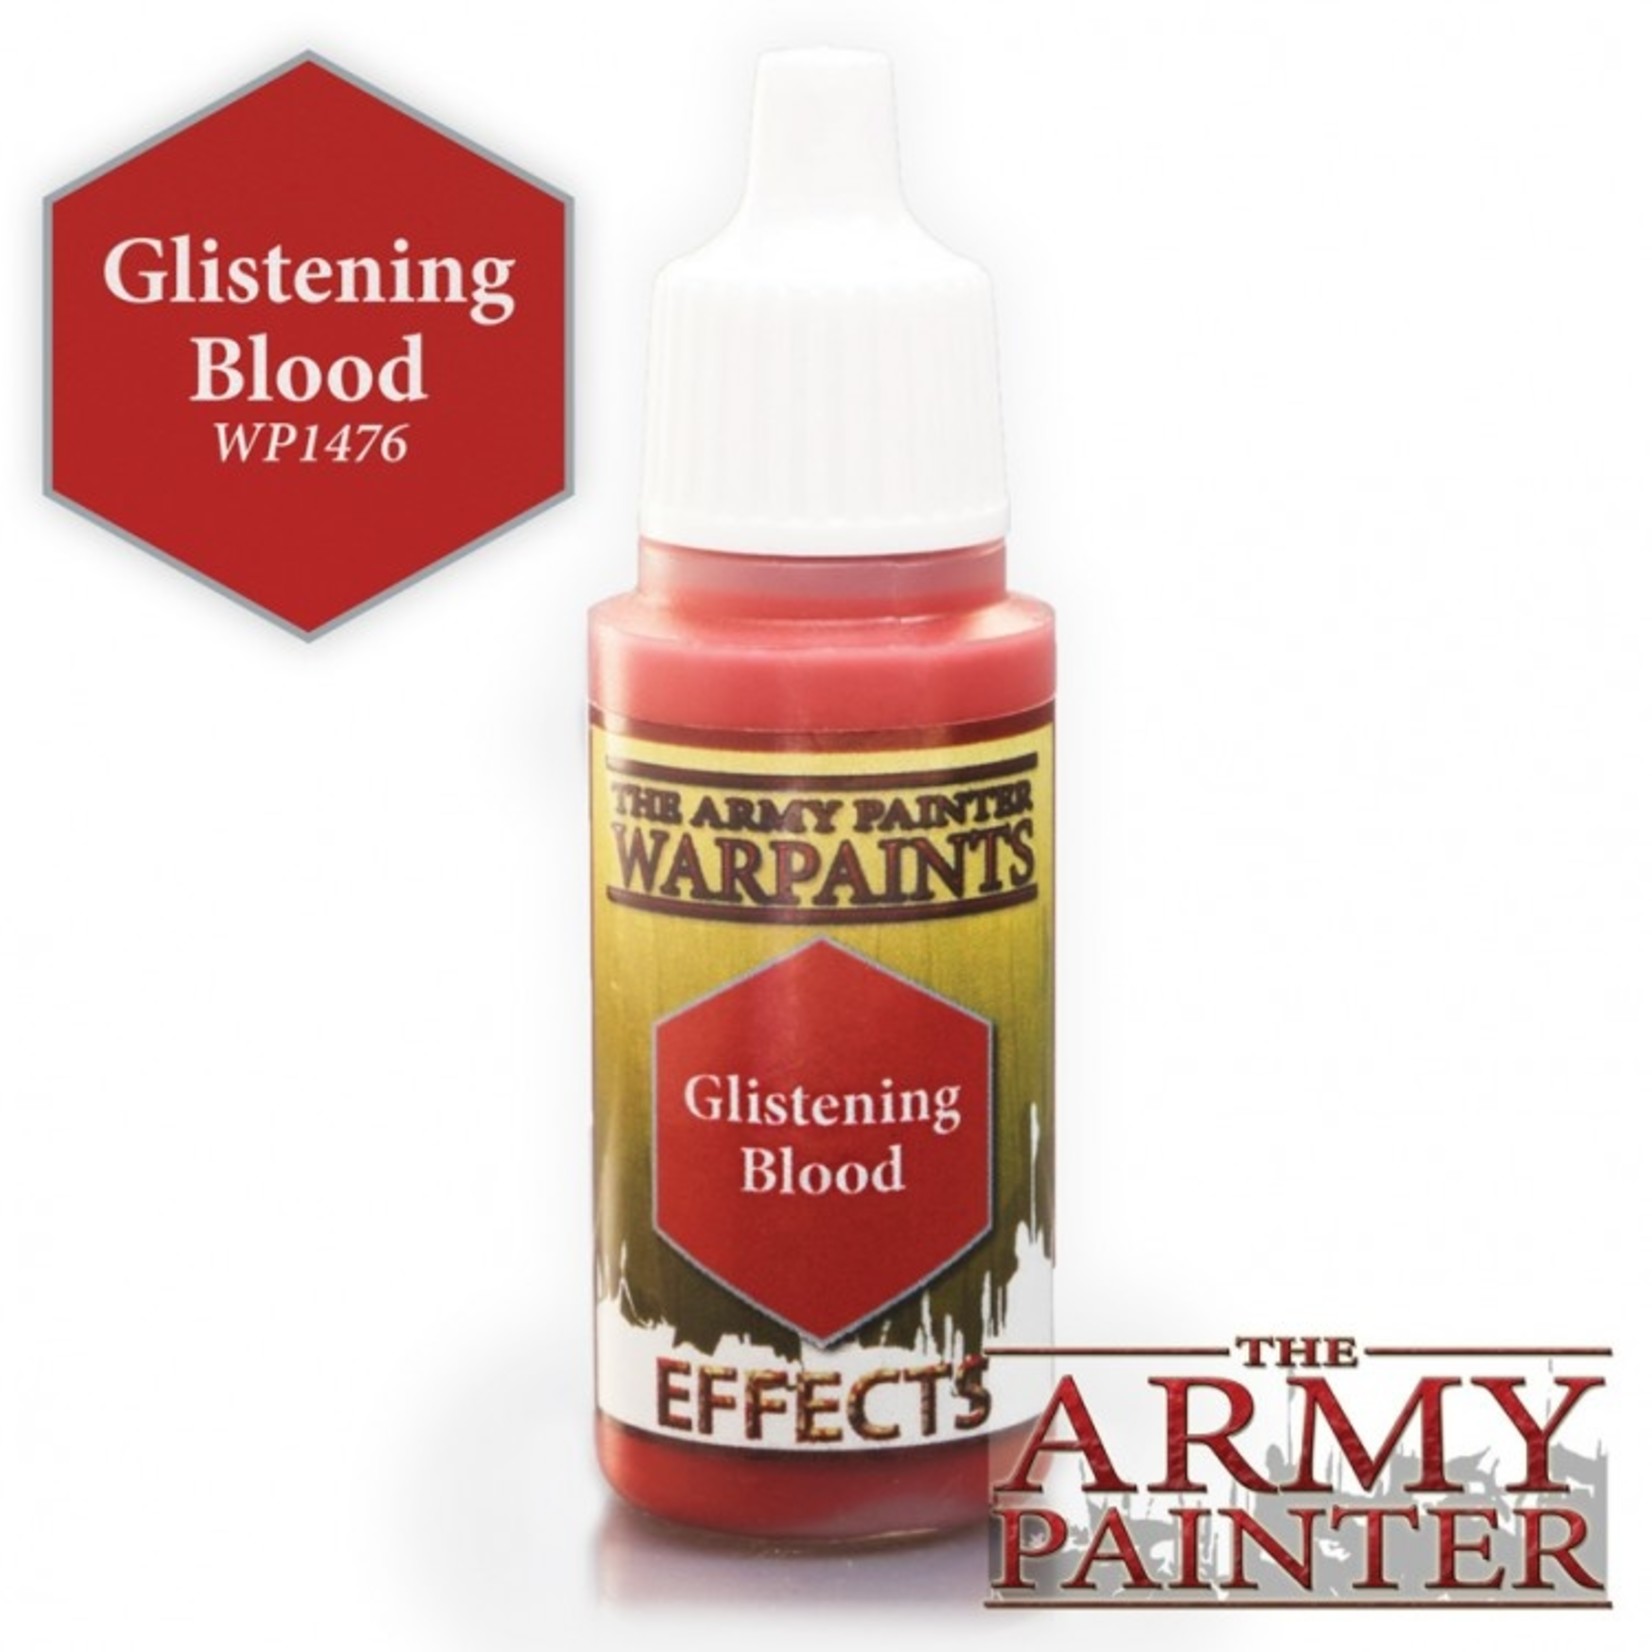 The Army Painter The Army Painter Glistening Blood 18ml